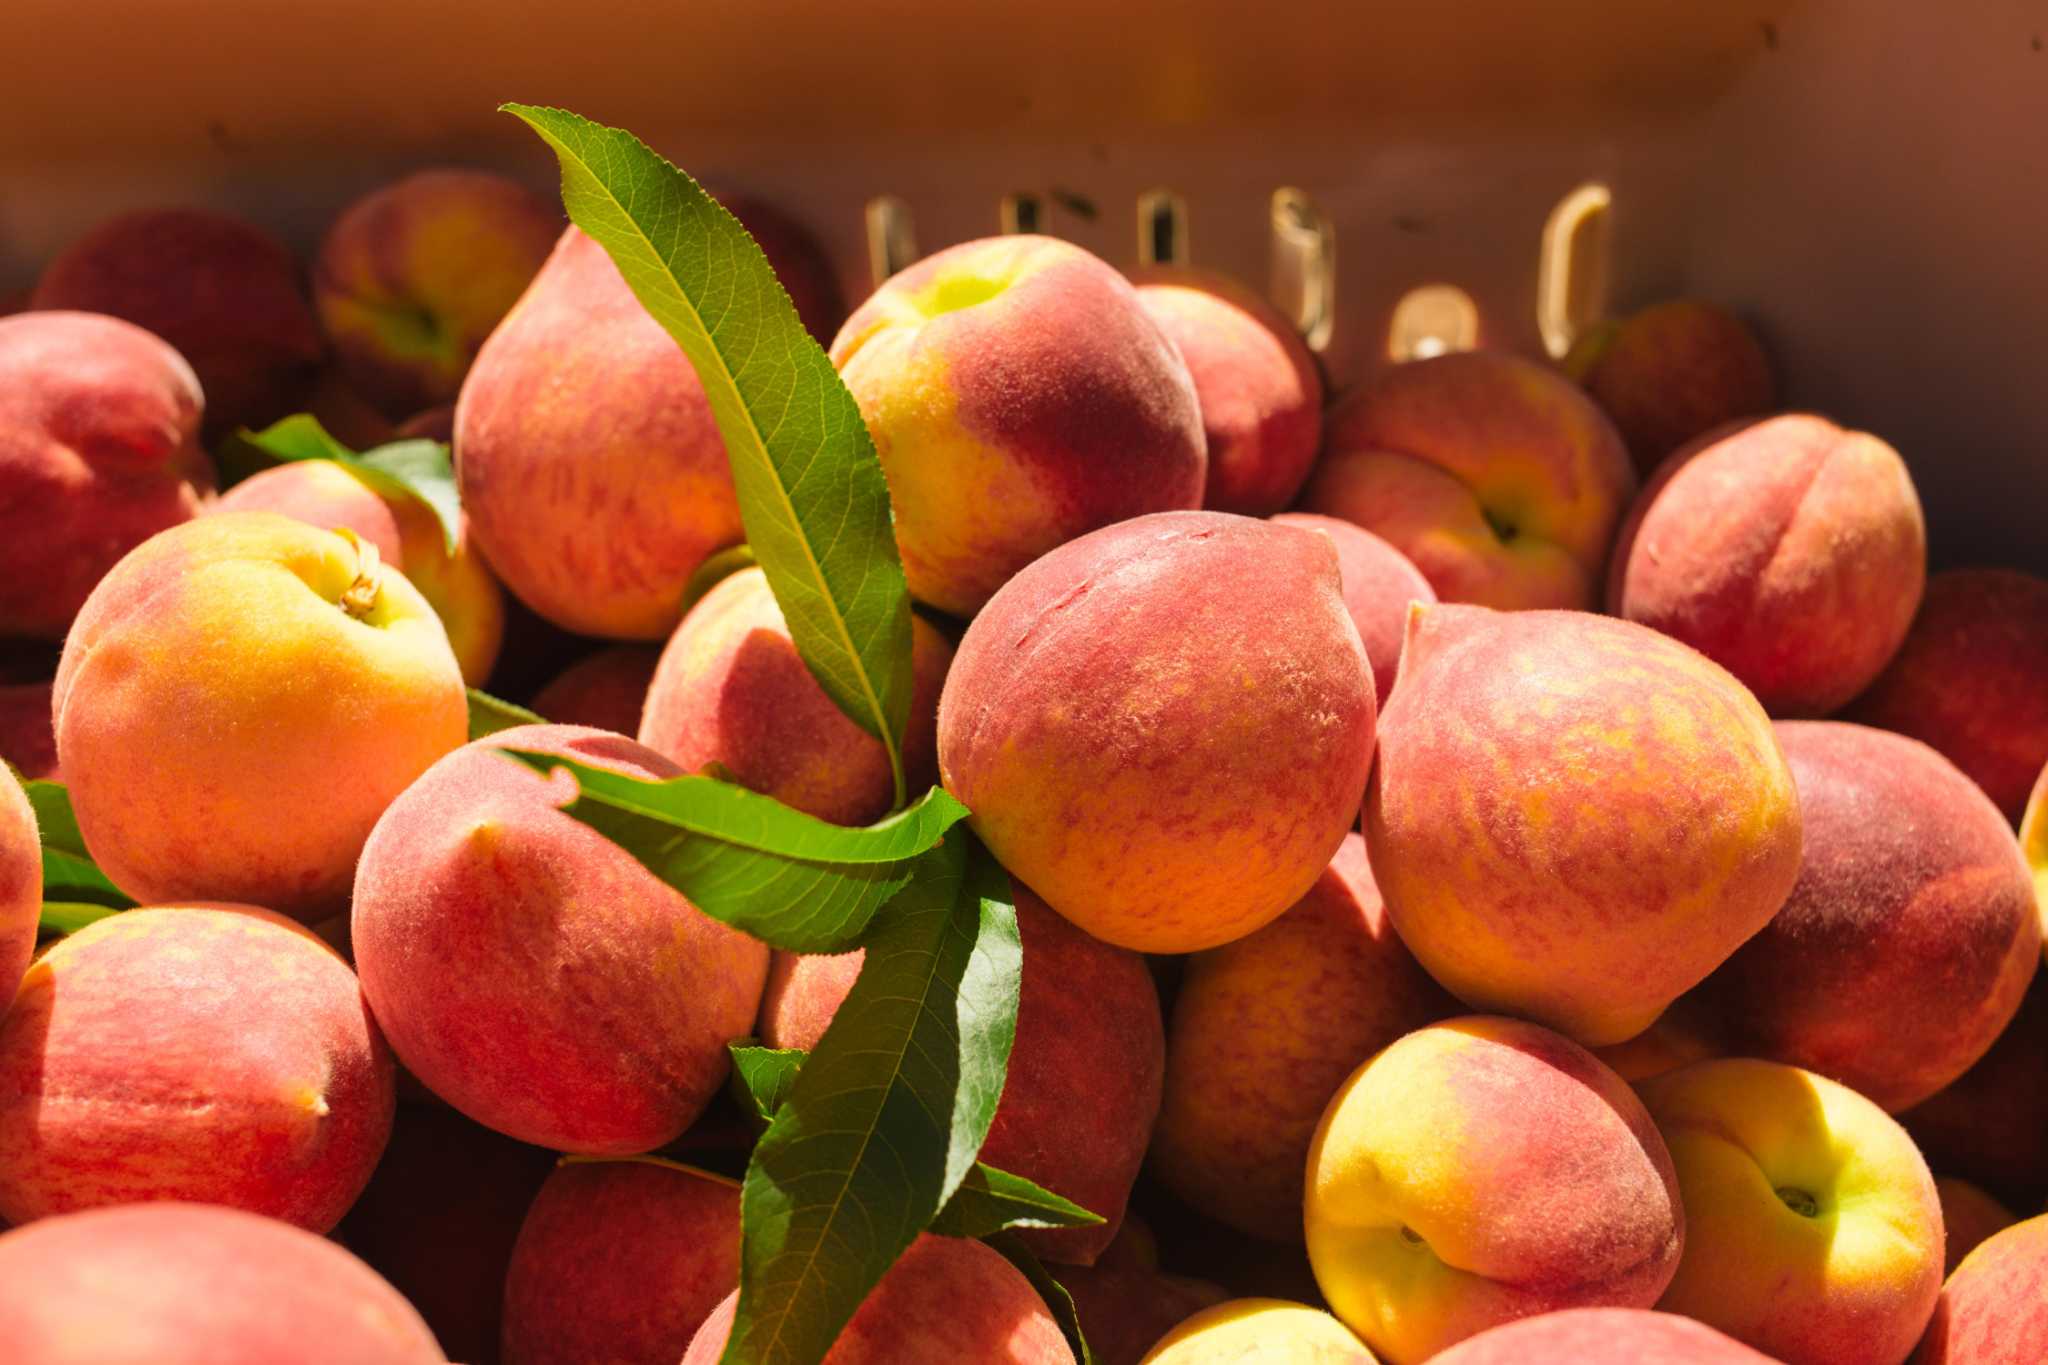 Georgia peaches for sale fresh off the truck June 5 in San Antonio with